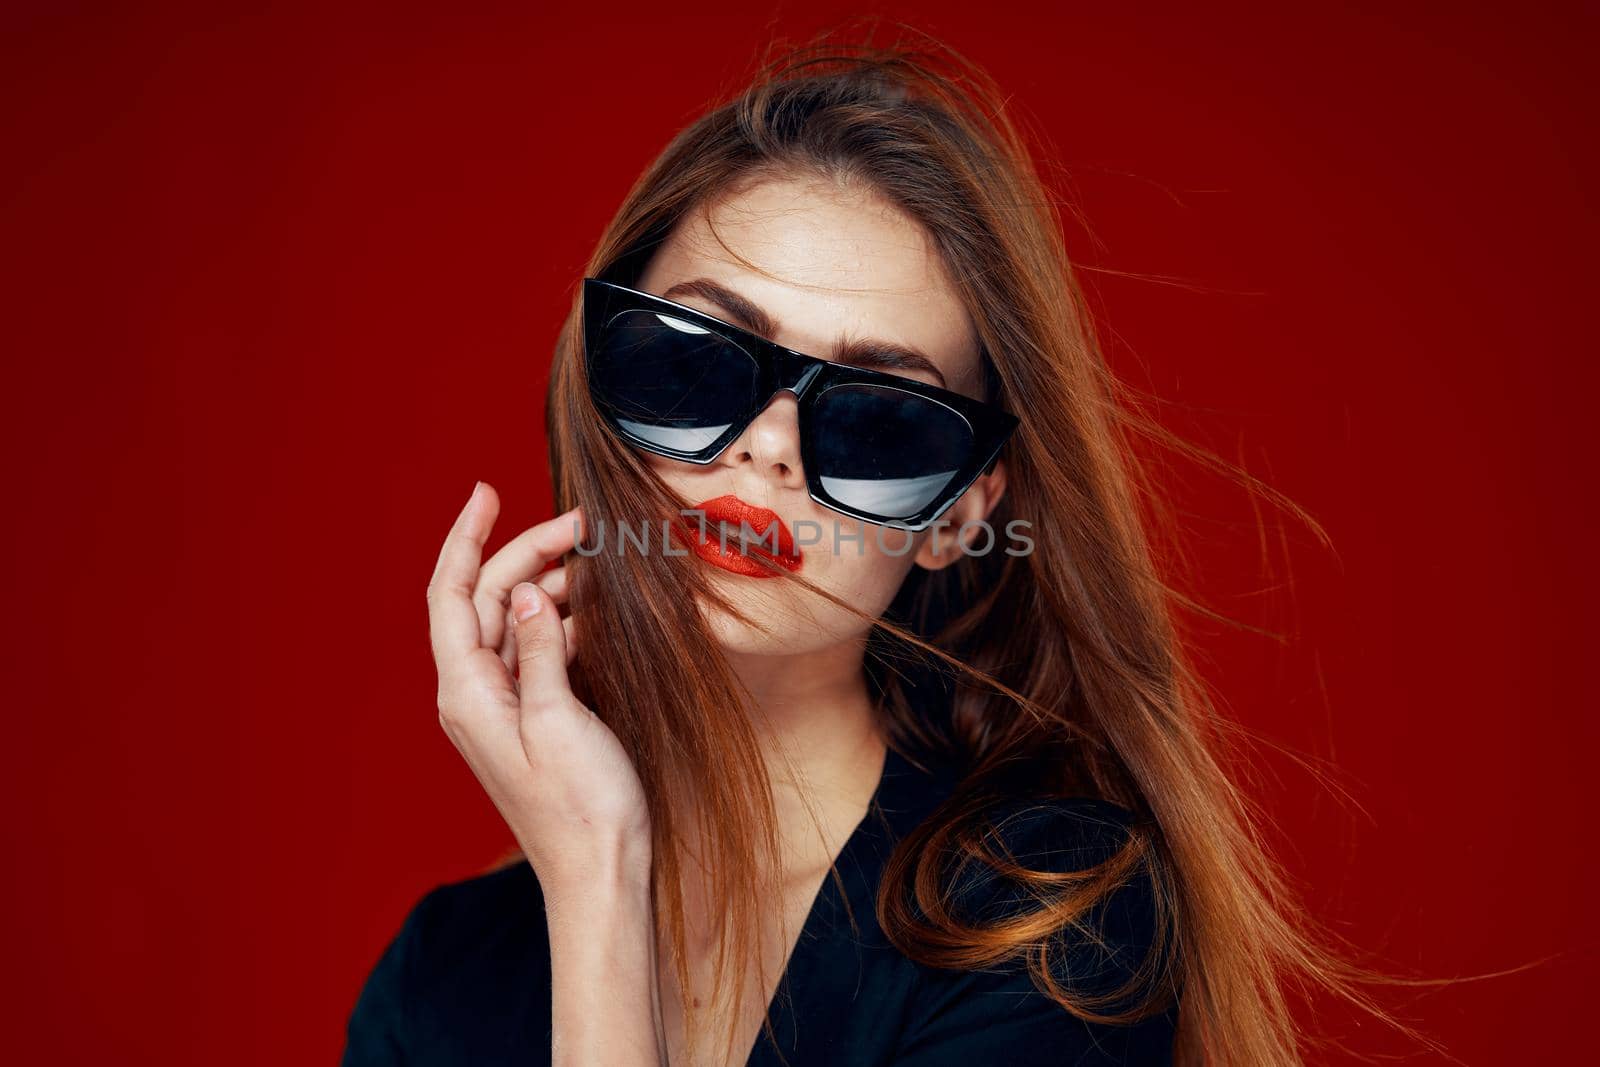 cheerful fashionable woman wearing sunglasses red lips posing red background. High quality photo